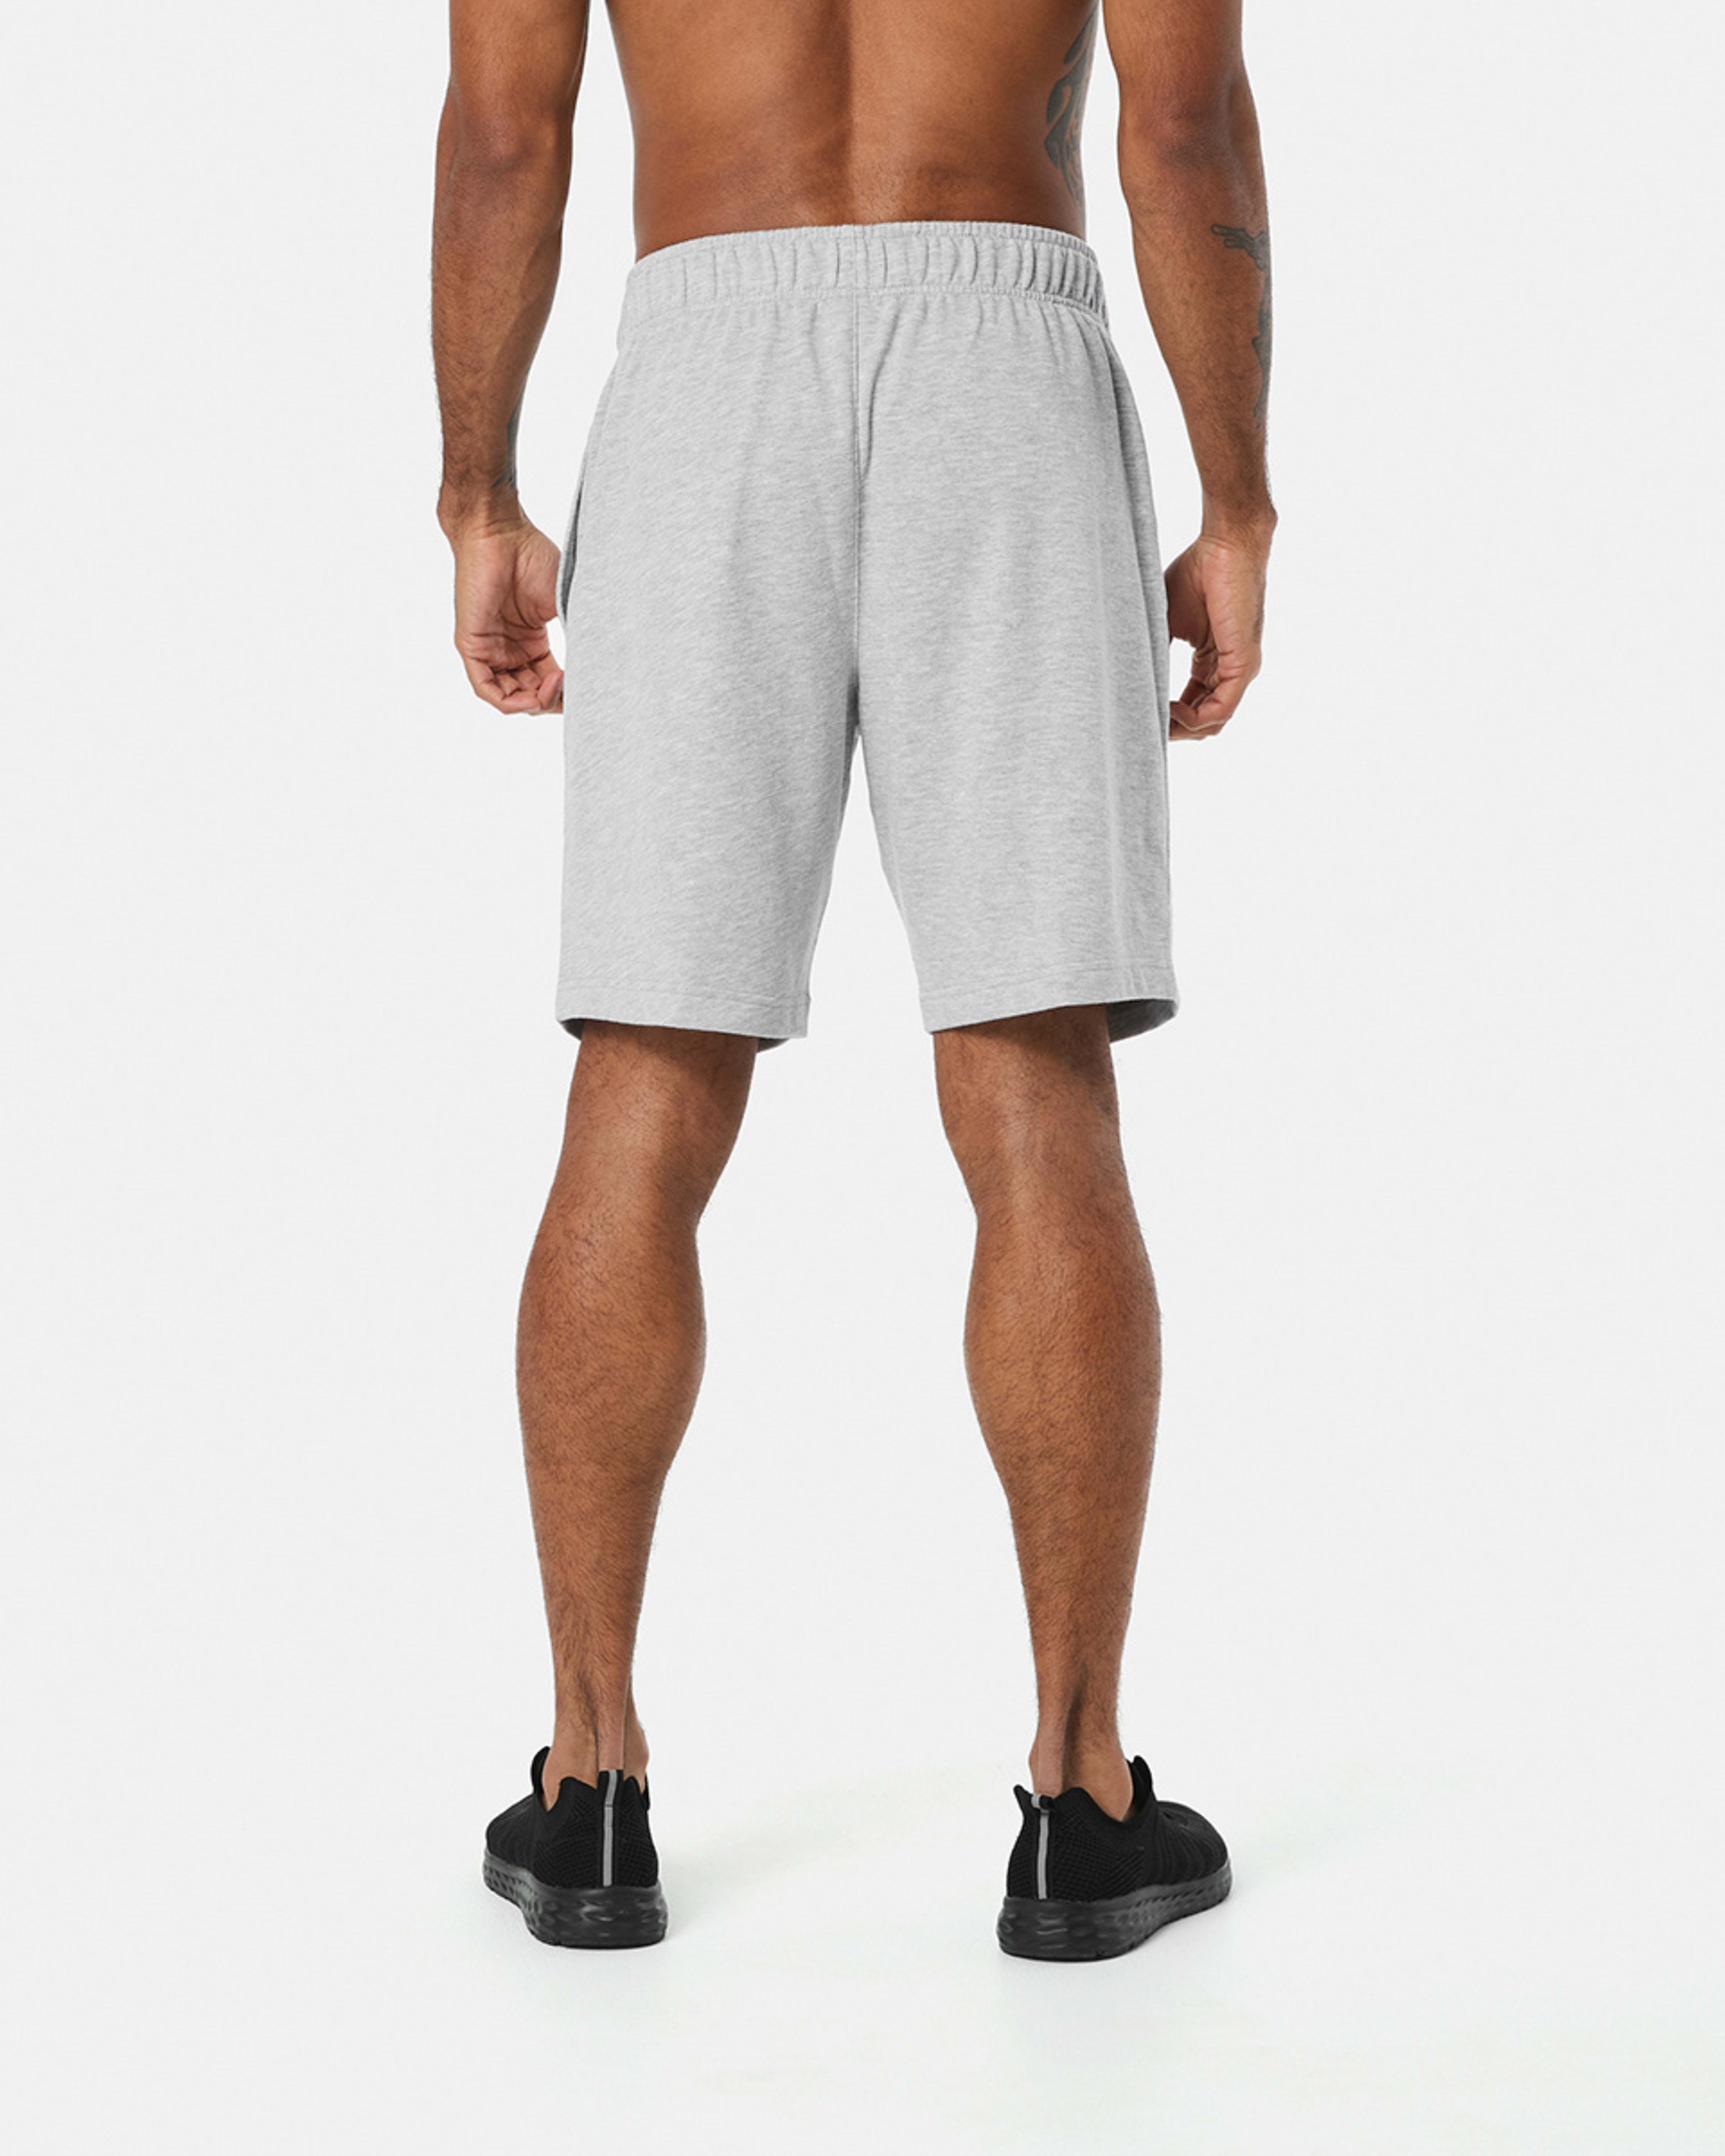 Active Everlast Mens French Terry Shorts - Kmart